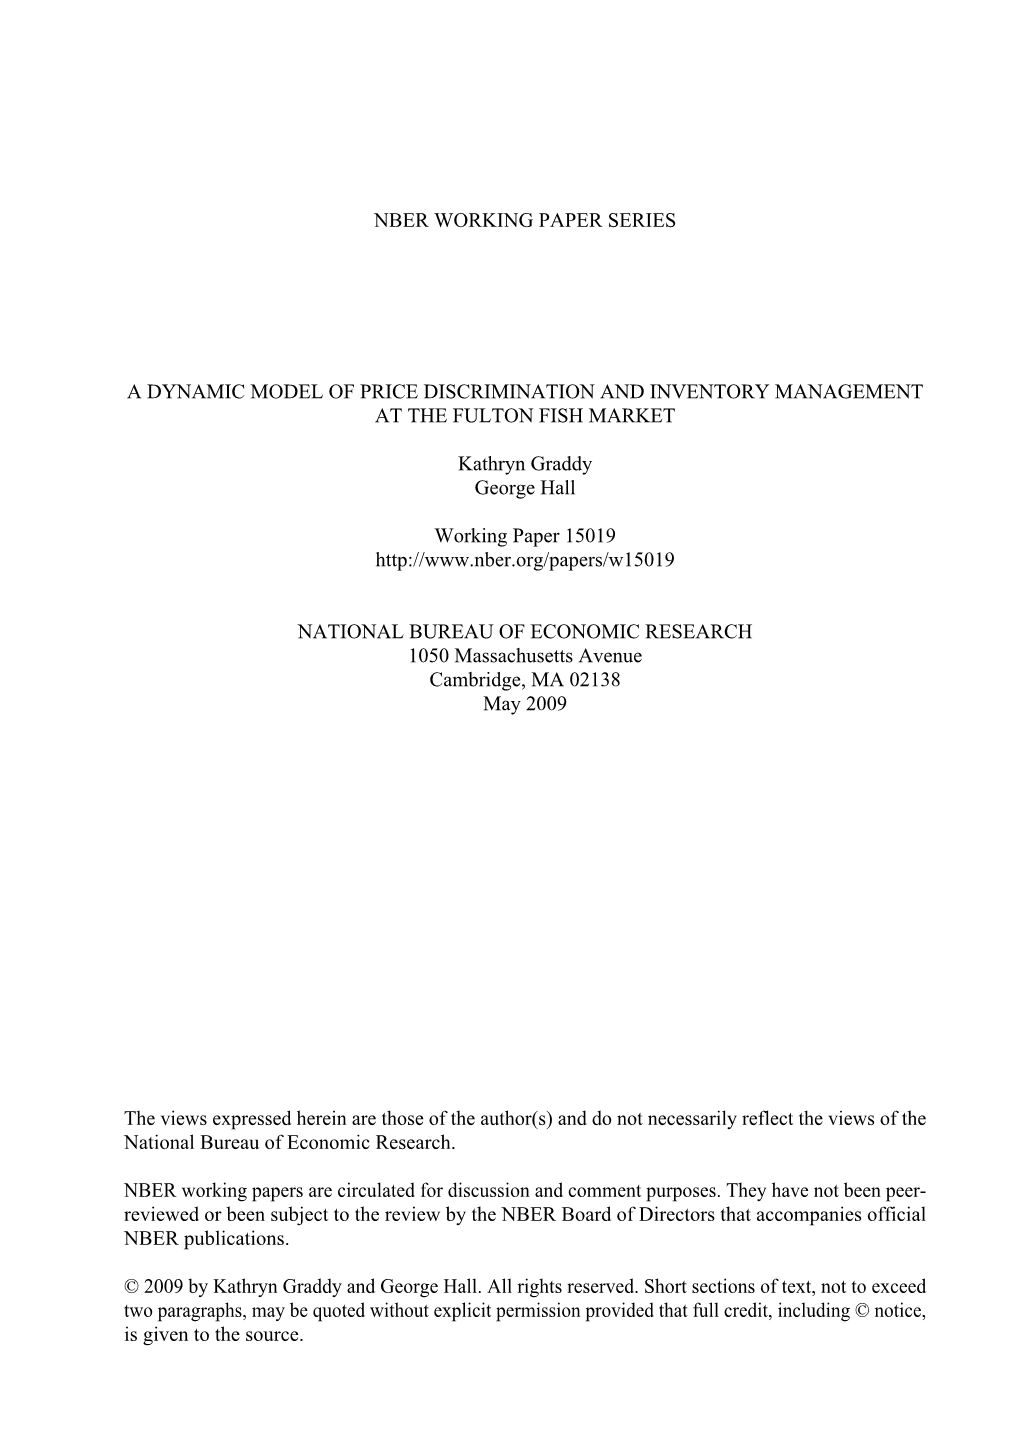 NBER WORKING PAPER SERIES a DYNAMIC MODEL of PRICE DISCRIMINATION and INVENTORY MANAGEMENT at the FULTON FISH MARKET Kathryn